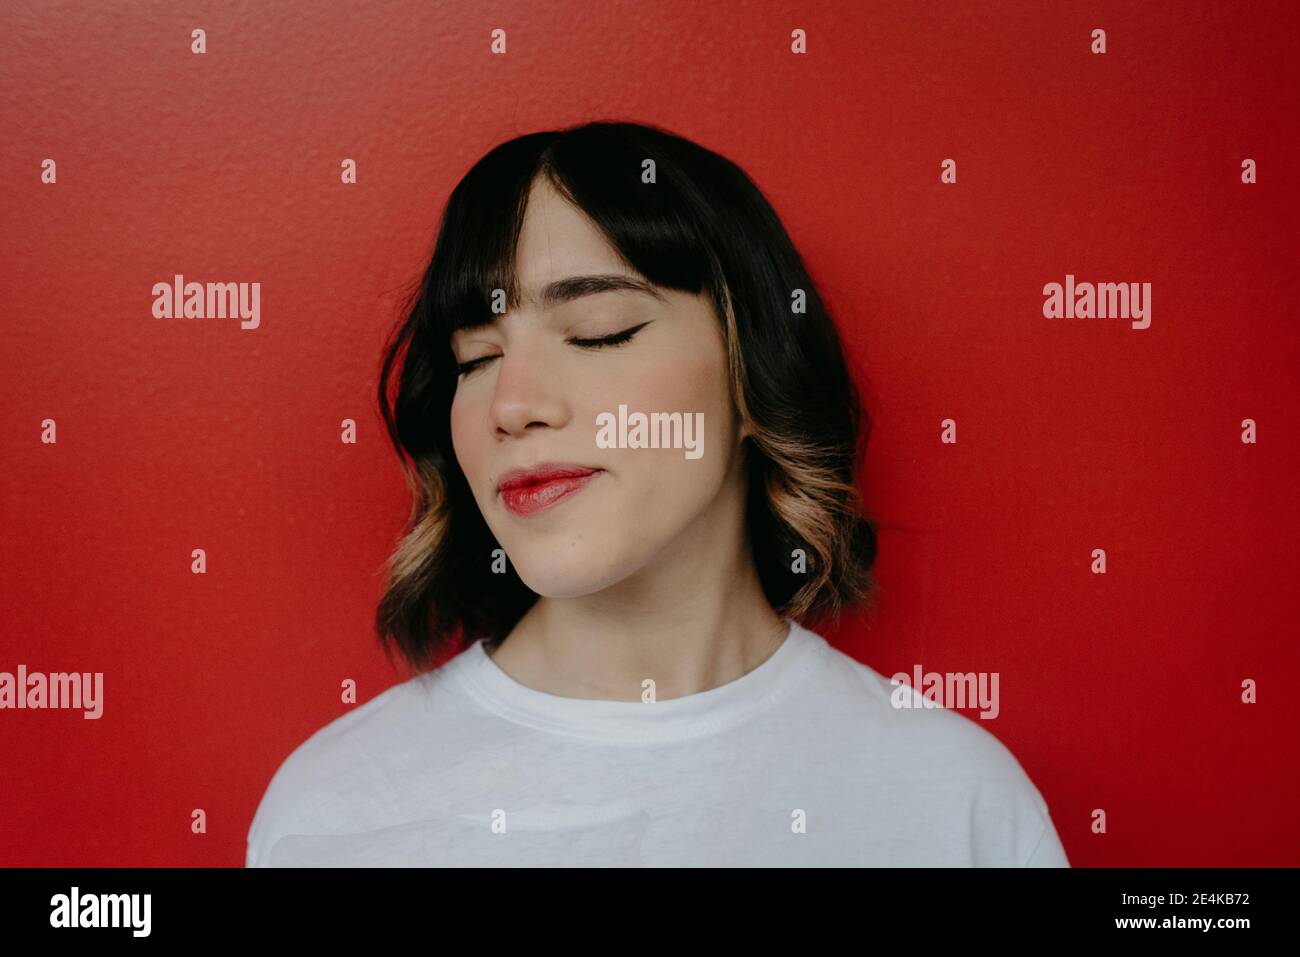 Beautiful woman with eyes closed against red background Stock Photo